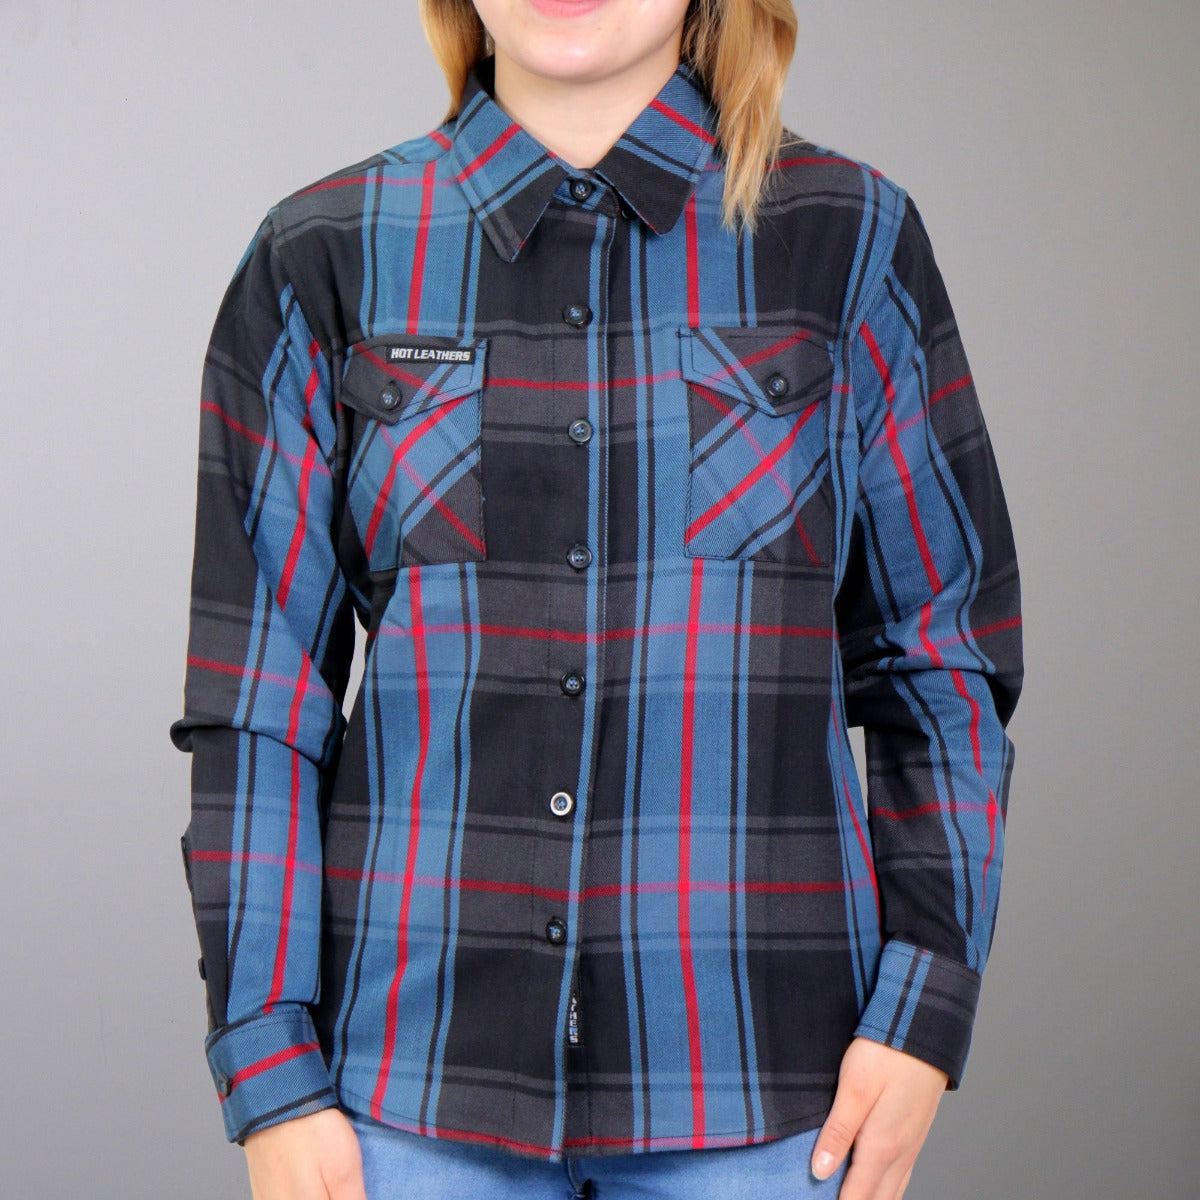 Hot Leathers Women's Flannel Long Sleeve The King